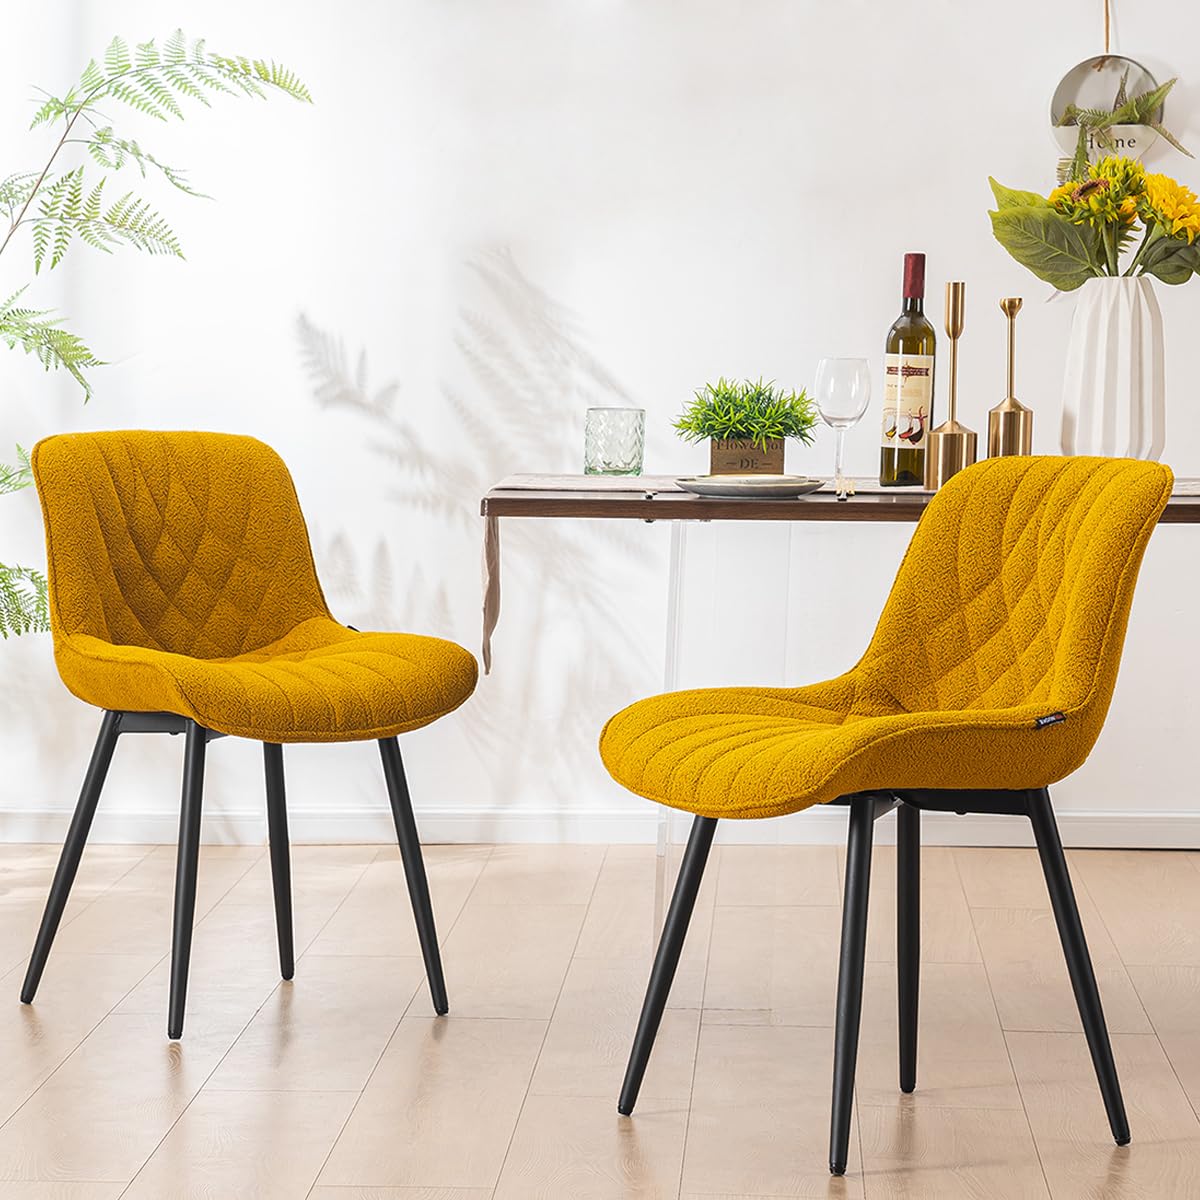 YOUNUOKE Comfortable Dining Chairs Set of 2, Mid-Century Modern Kitchen Dining Room Chairs, Upholstered Backrest Boucle Dining Chair with Black Metal, Yellow